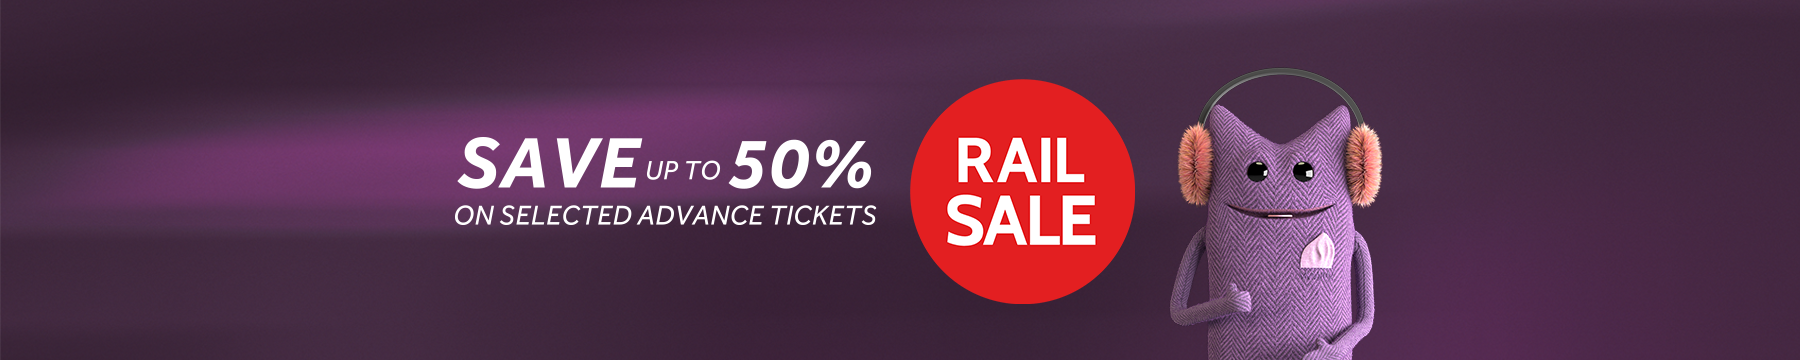 Save up to 50% on selected advance tickets. Rail Sale